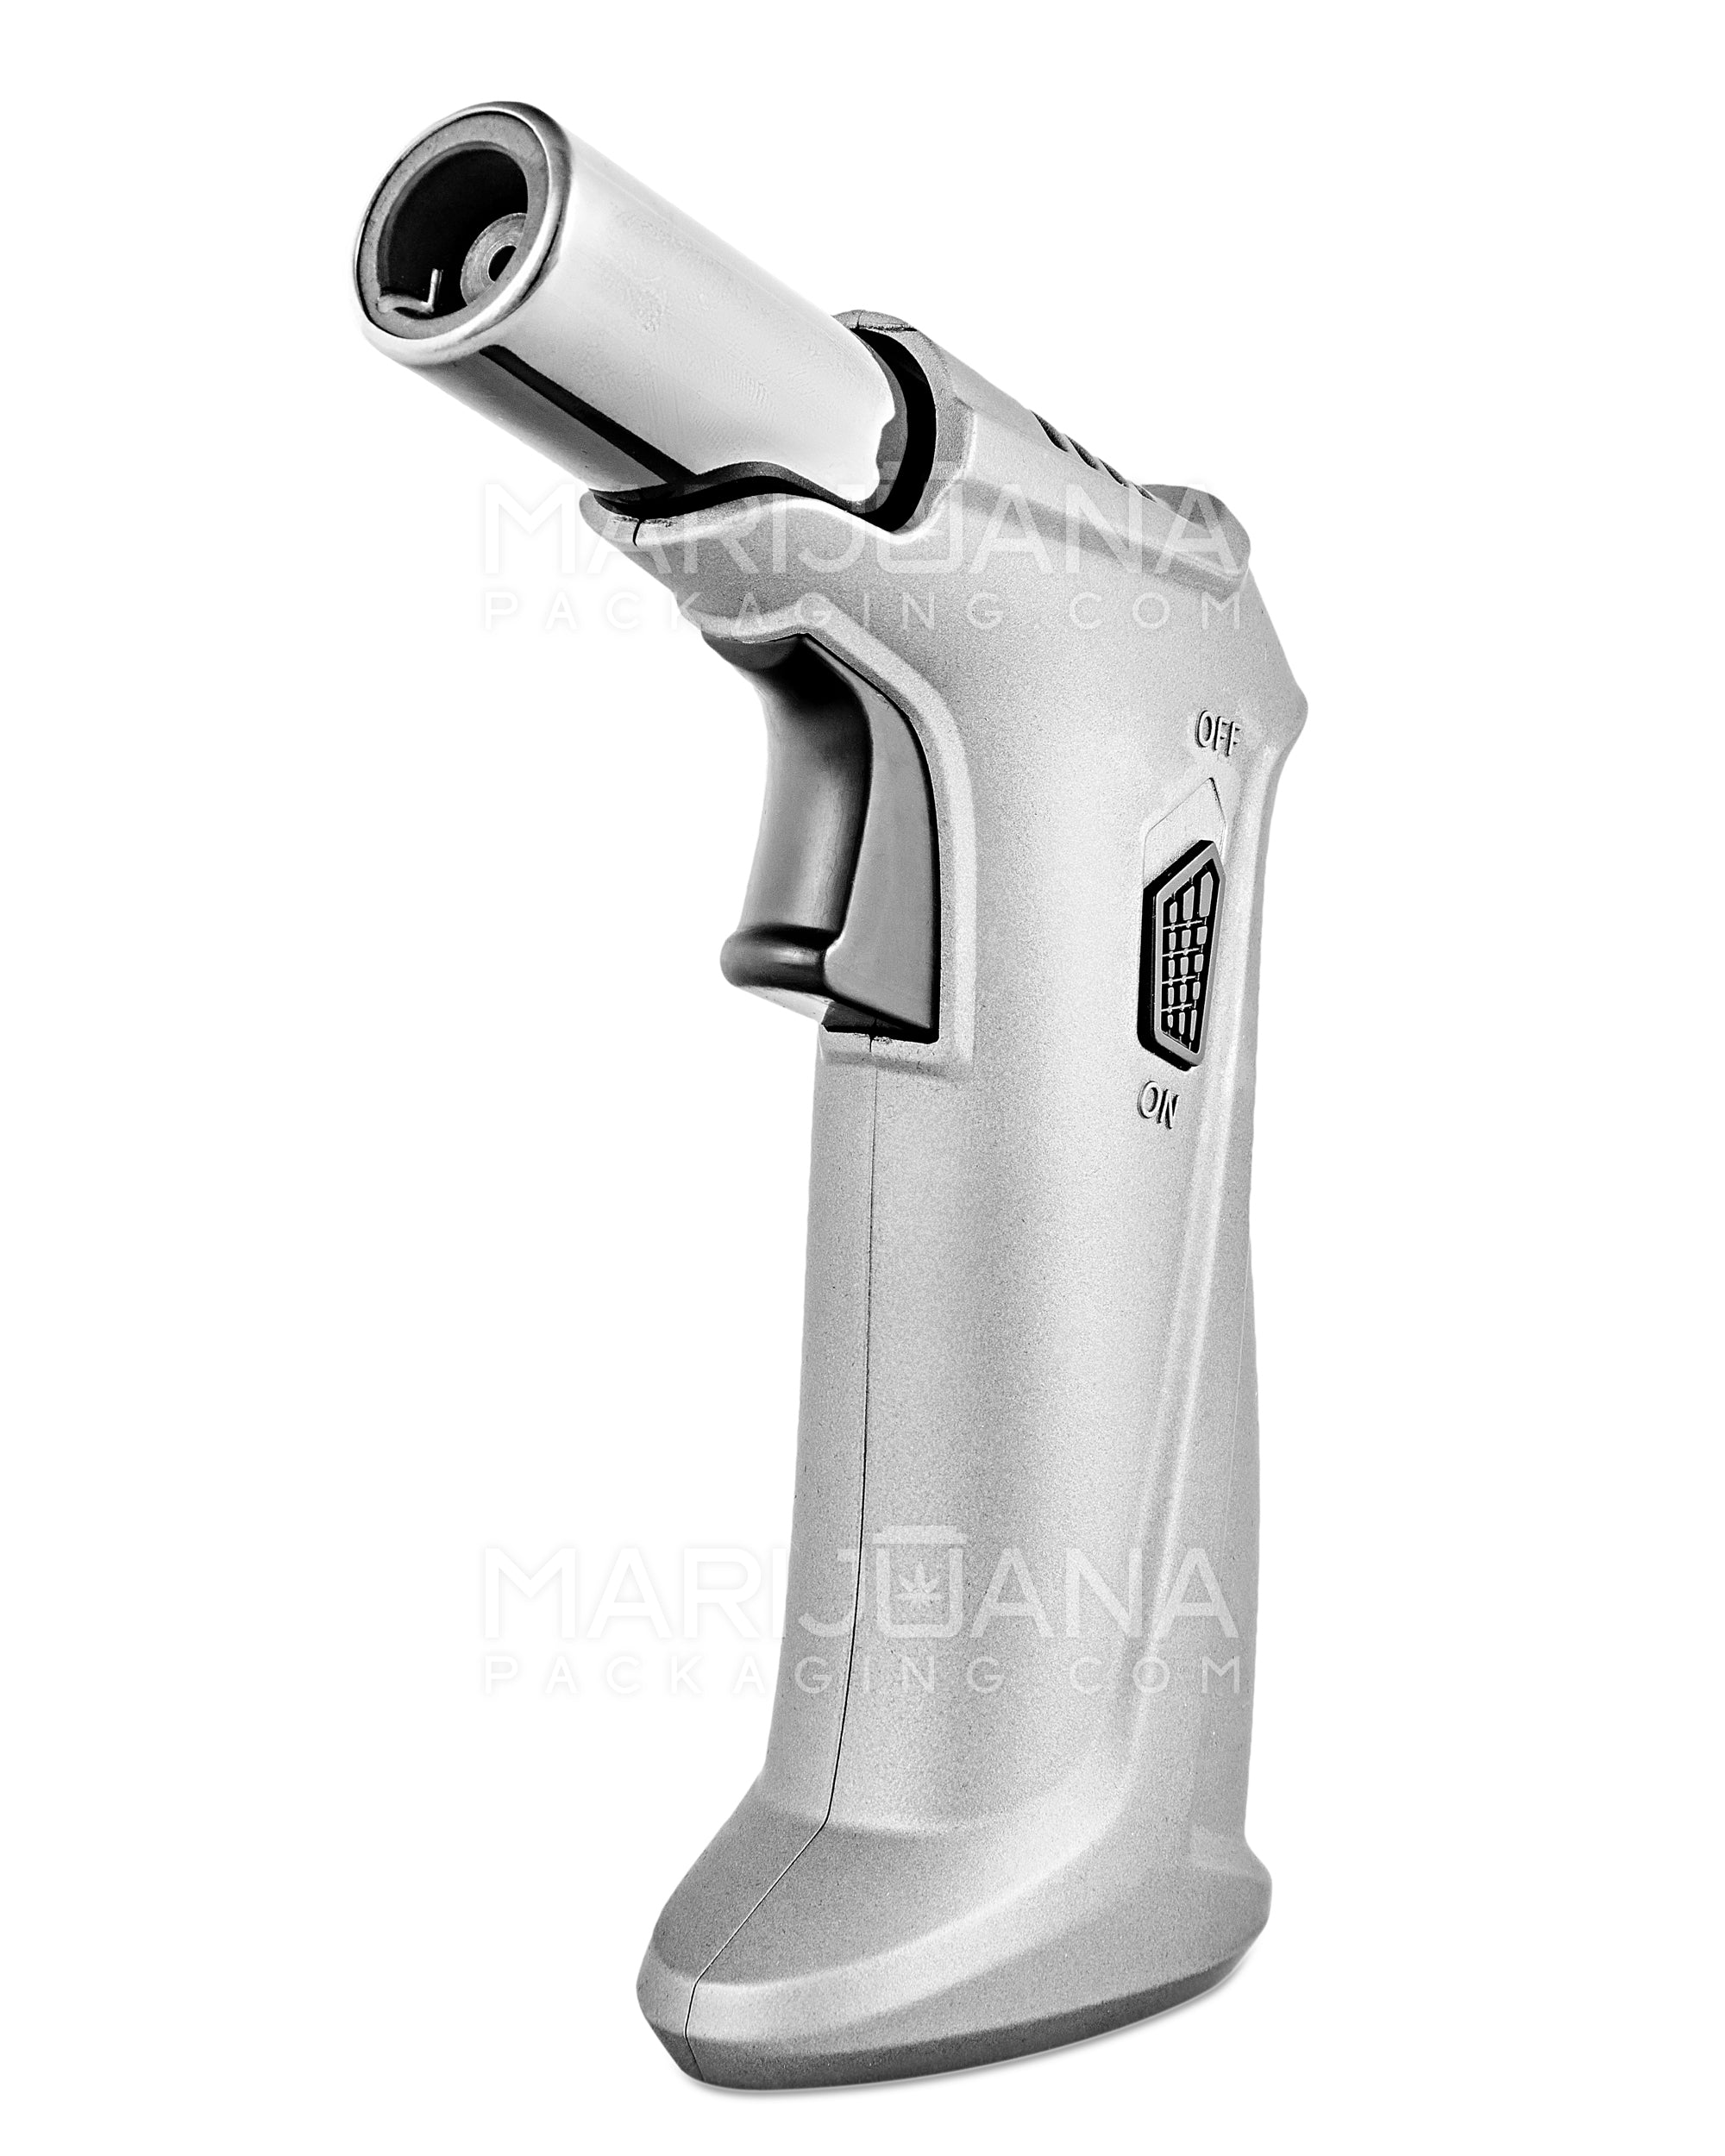 TECHNO | High Angle Metal Torch w/ Safety Lock | 6.5in Tall - Butane - Gray - 2